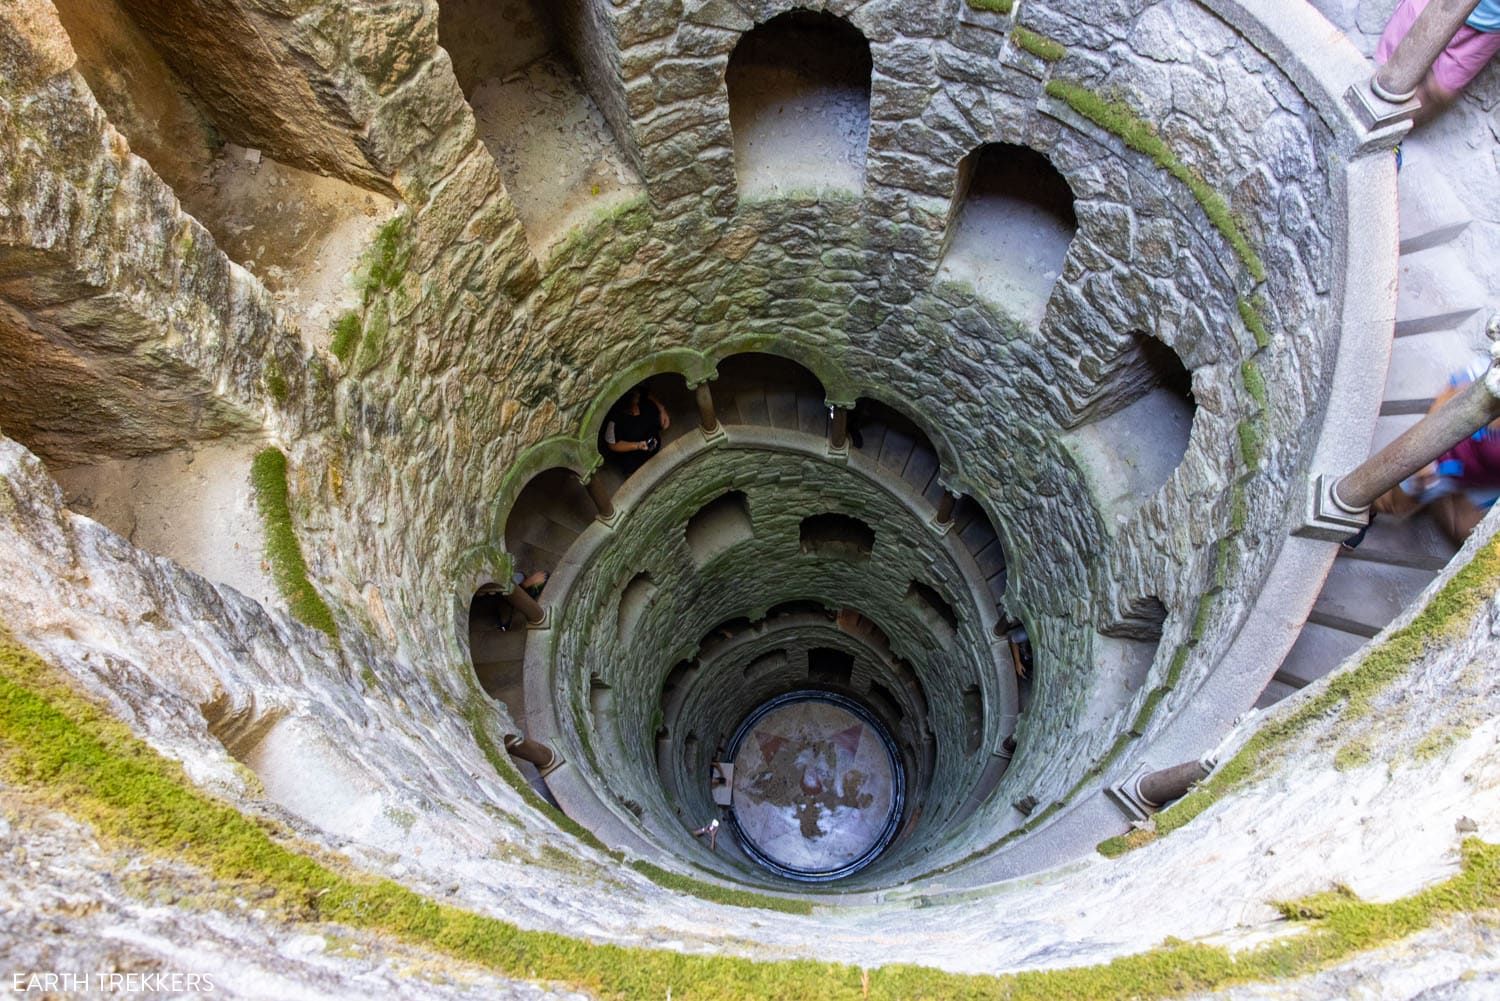 Initiation Well Sintra Portugal | Best Day Trips from Lisbon